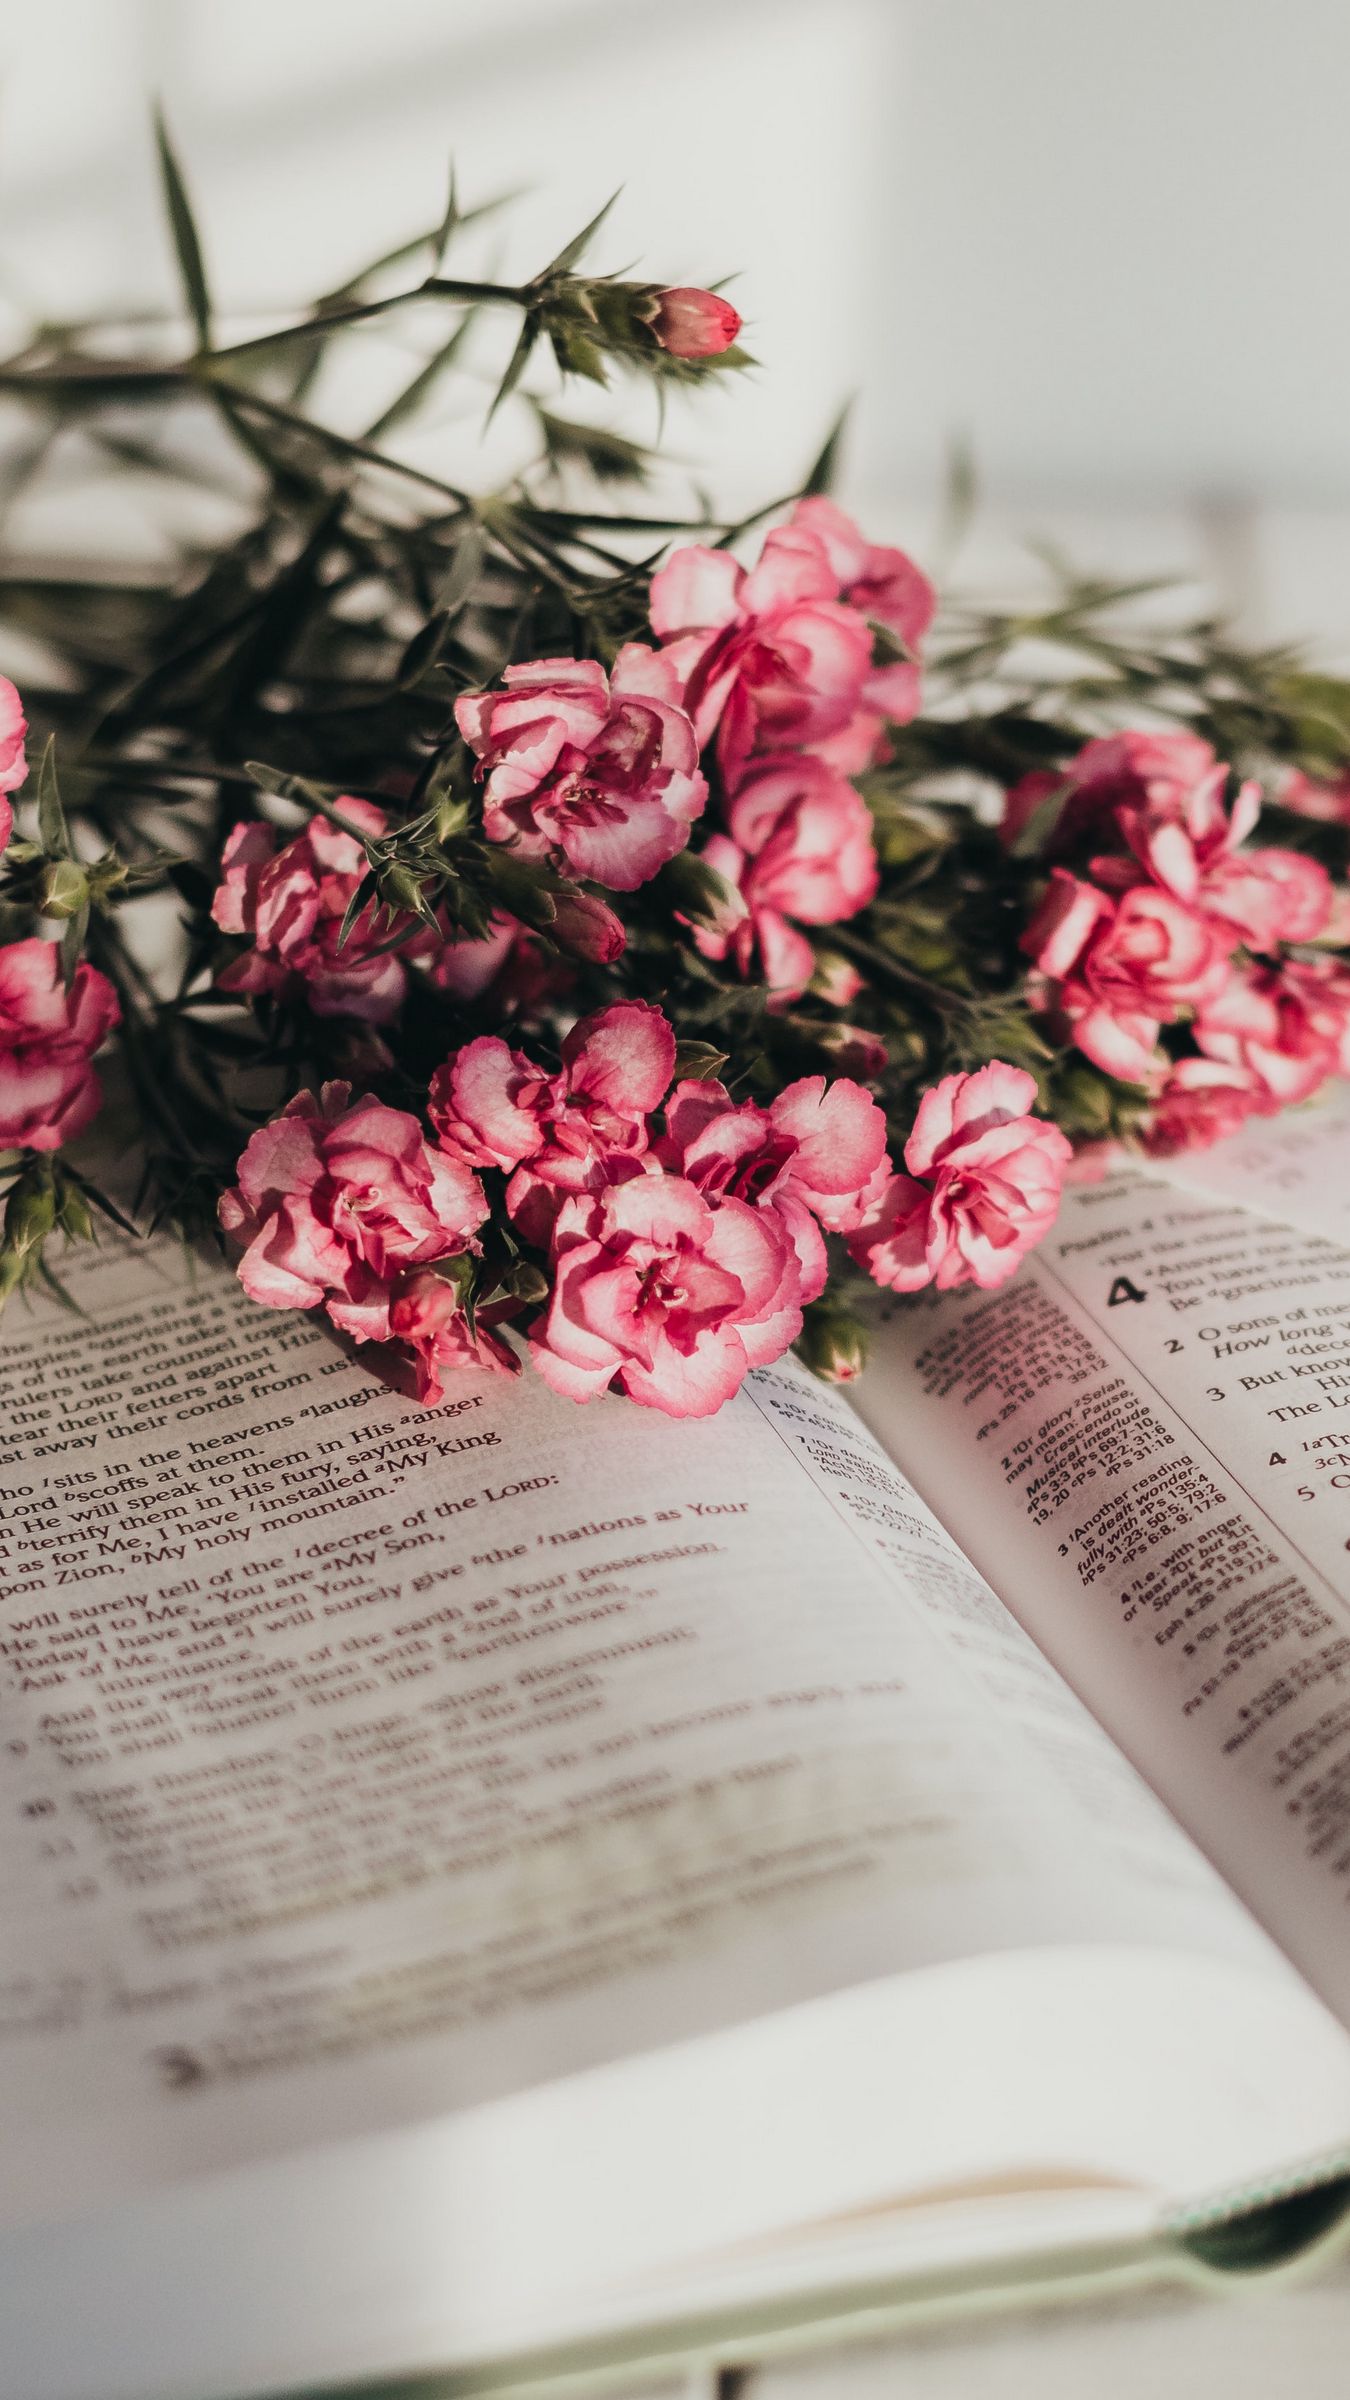 Flowers And Books Wallpapers